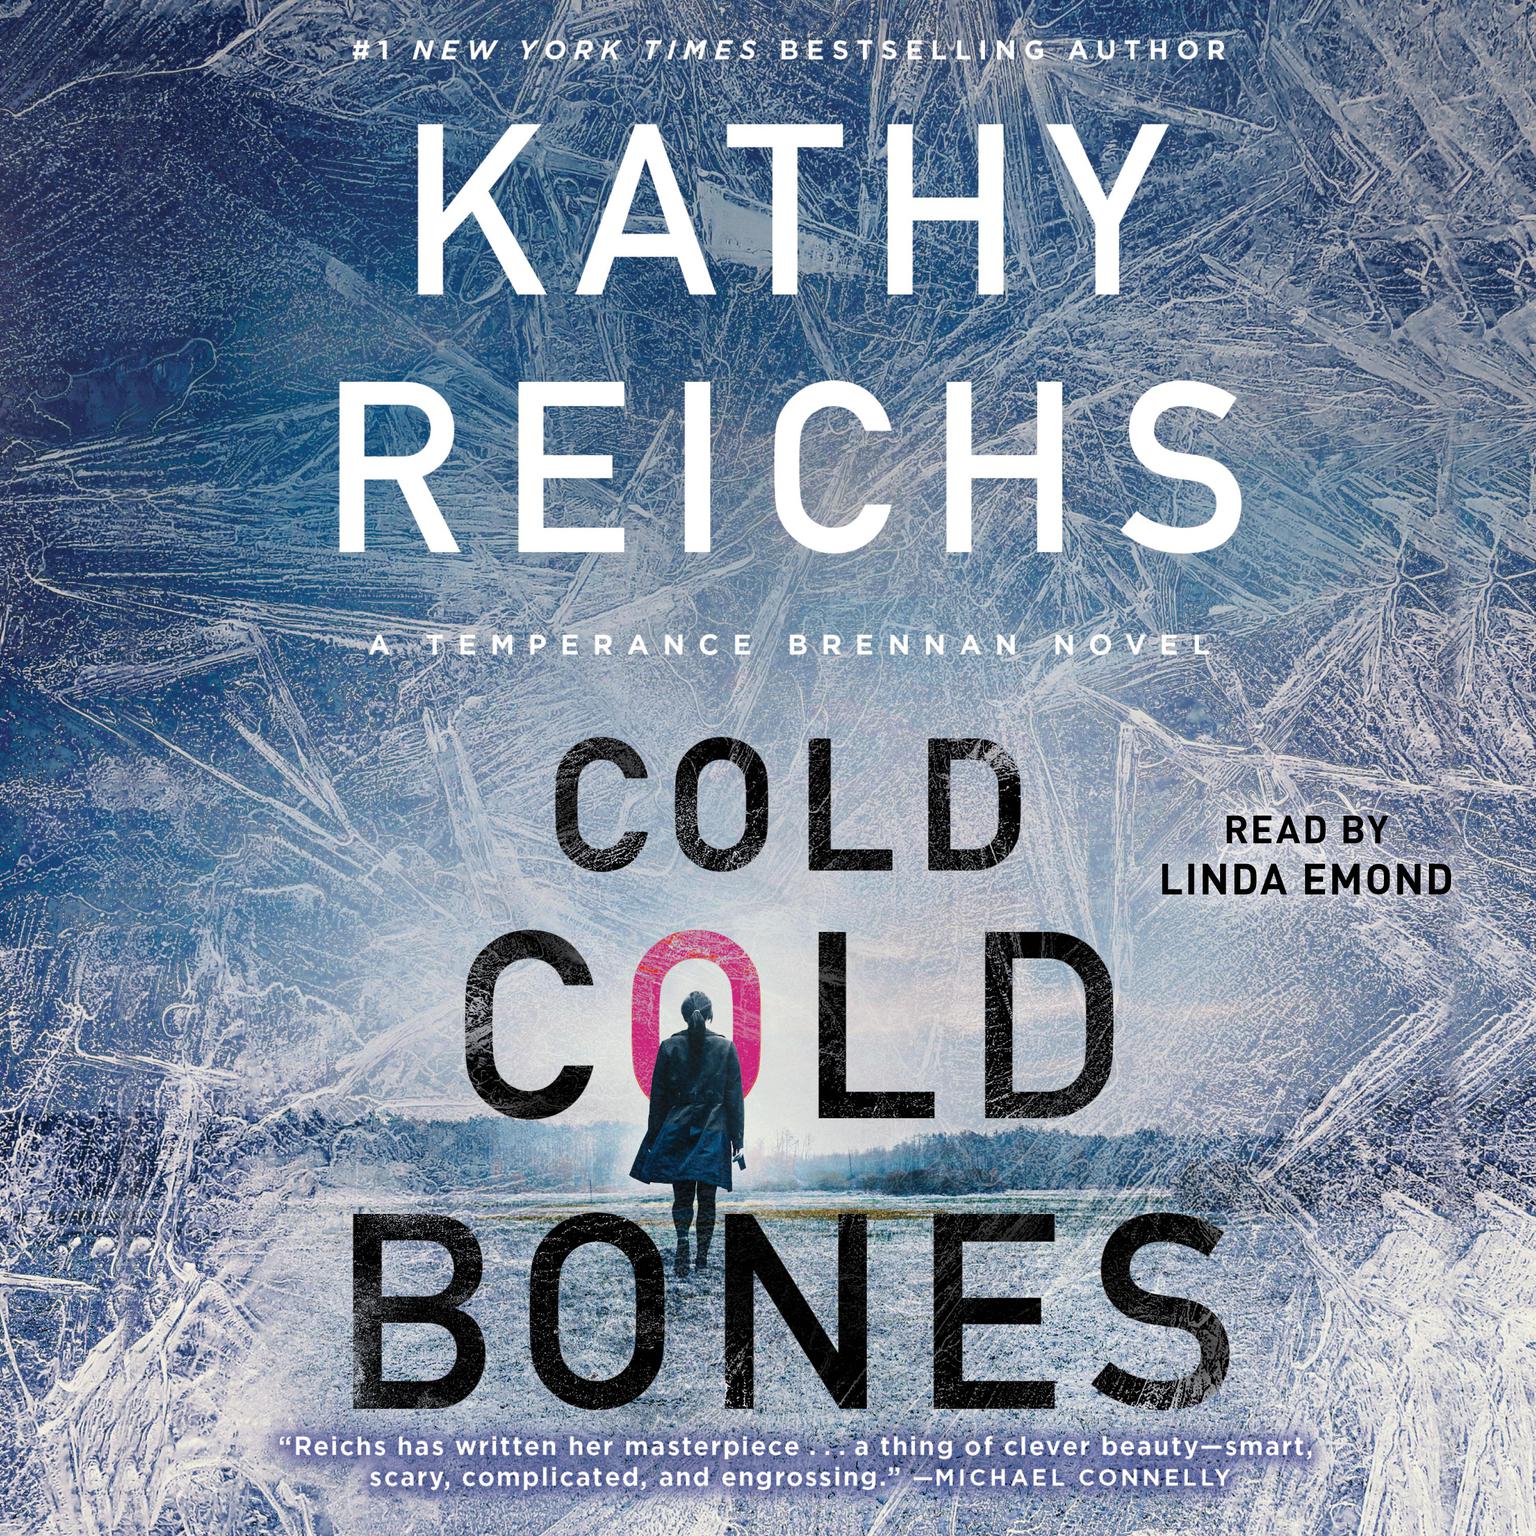 Cold, Cold Bones Audiobook, by Kathy Reichs